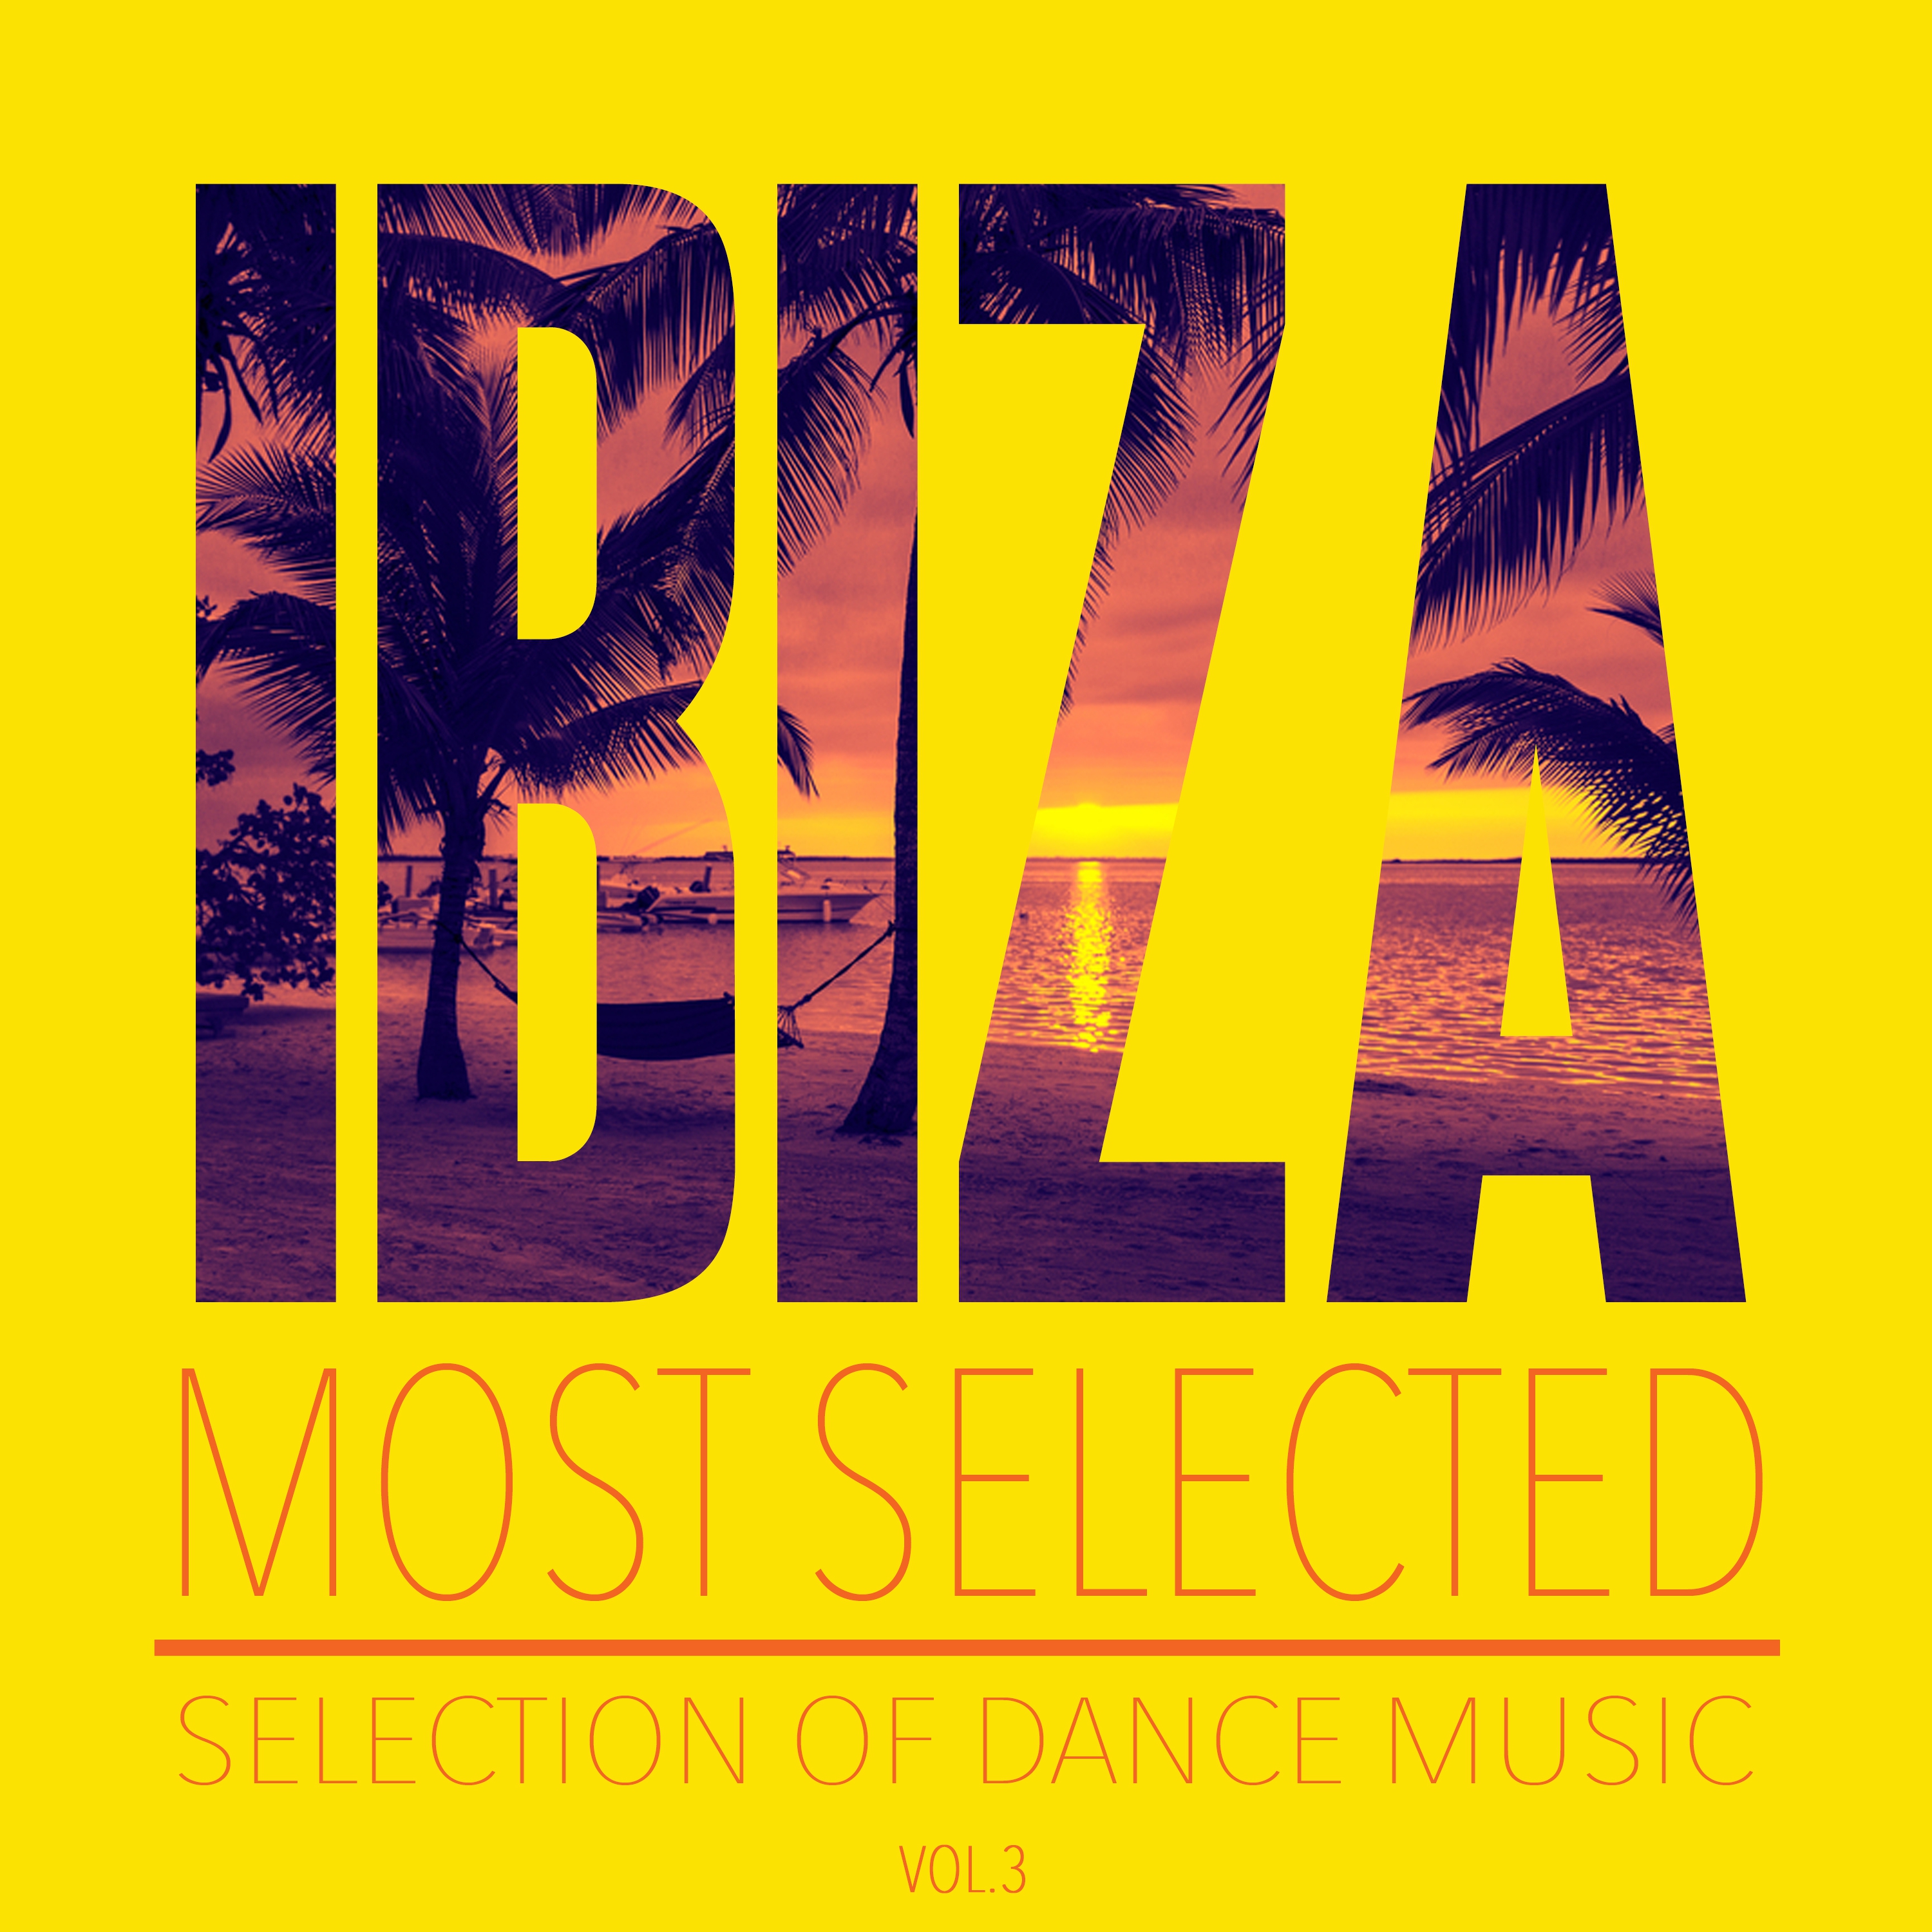 Ibiza Most Selected, Vol. 3 - Selection of Dance Music